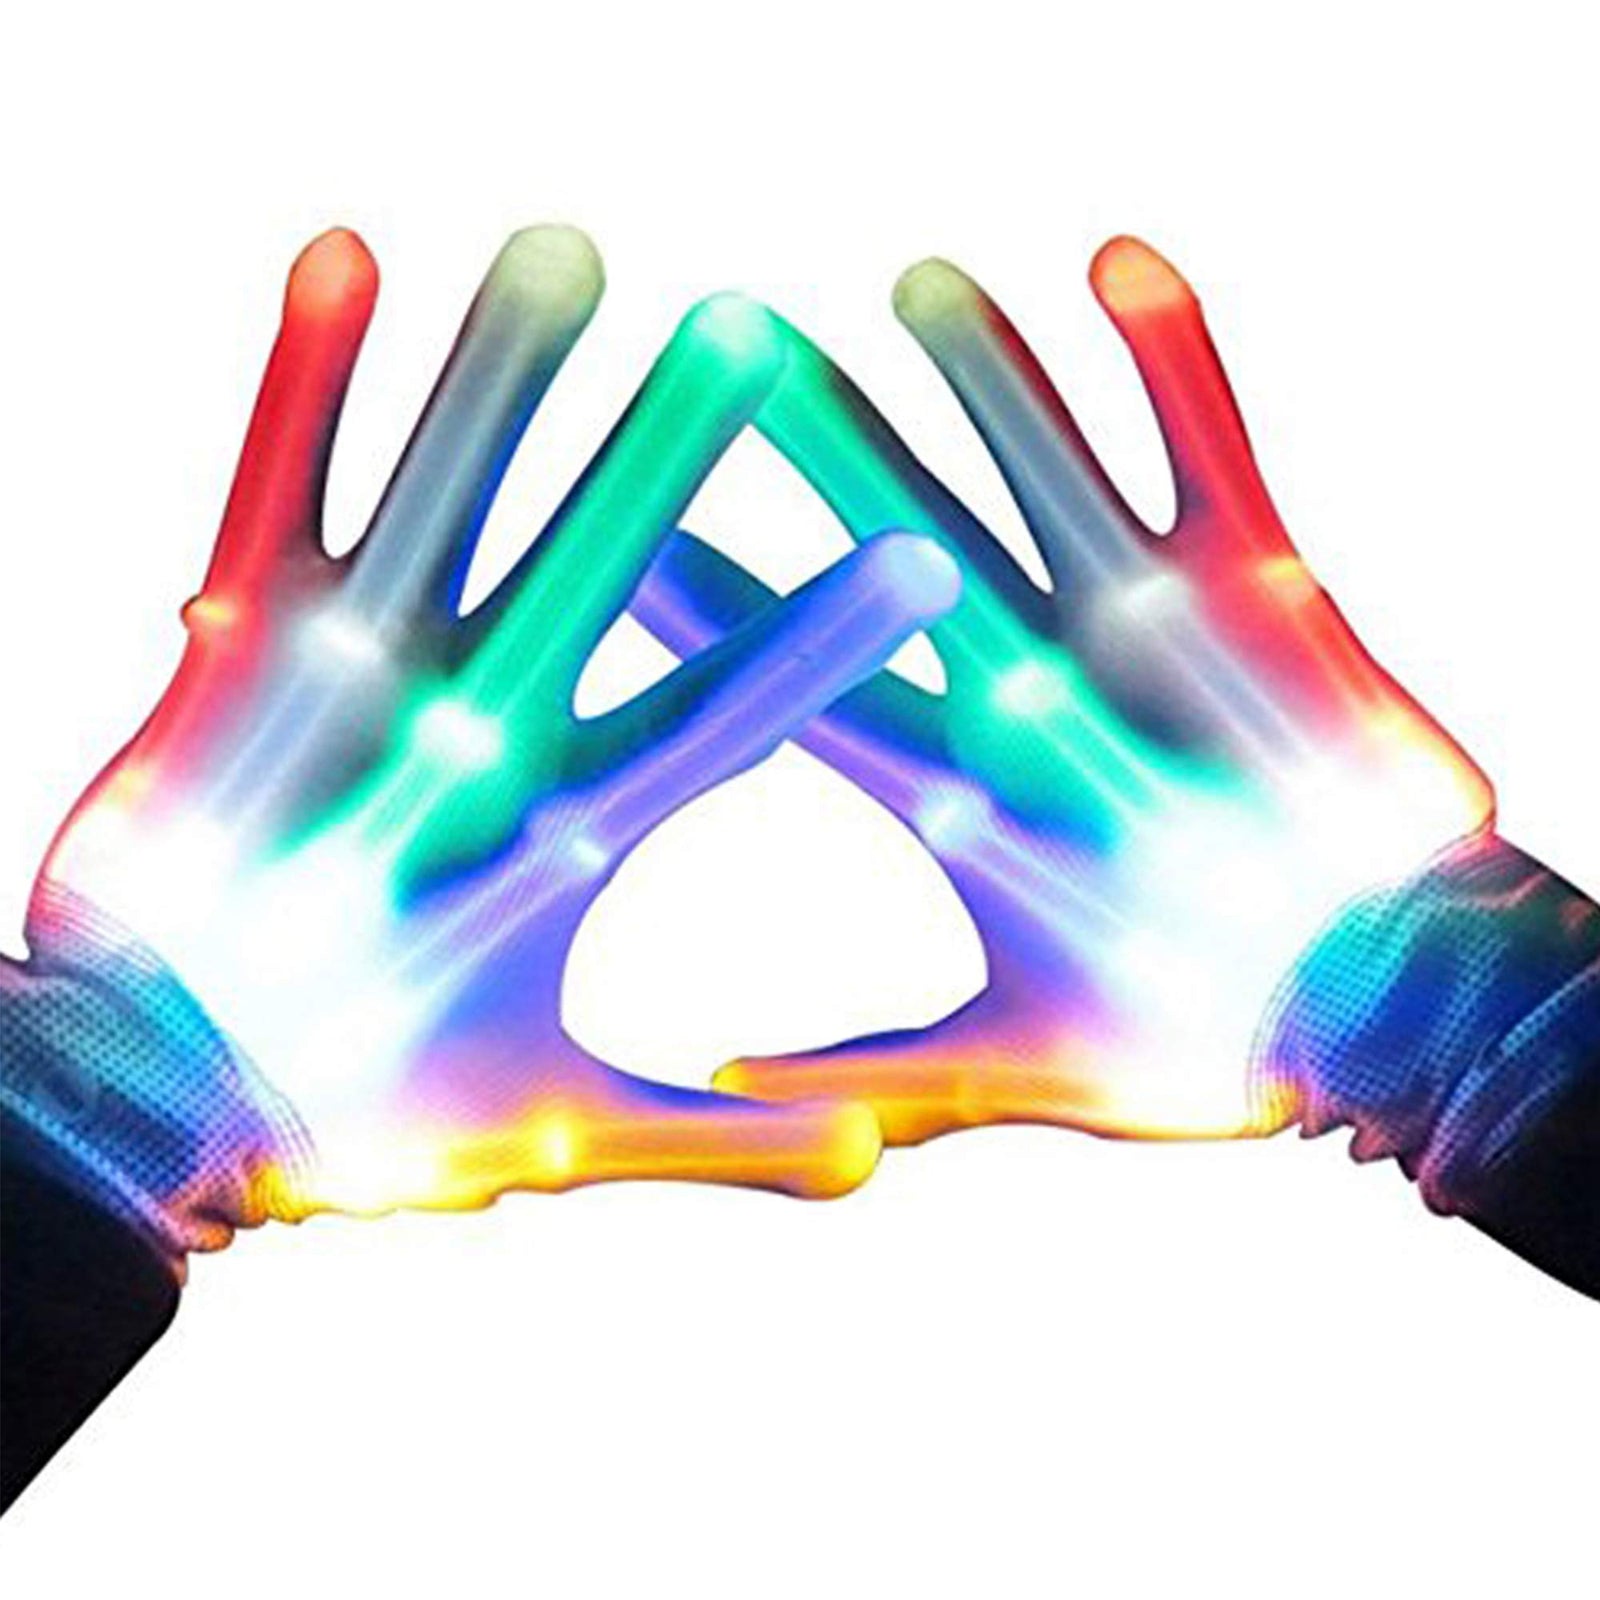 ATOPDREAM Cool Fun Toys for 3-12 Year Old Boys Girls, Flashing LED Light Gloves Glow Gloves Autism Toys for Age 3-12 Boys Girls Birthdays Halloween Christmas Carnival Gifts